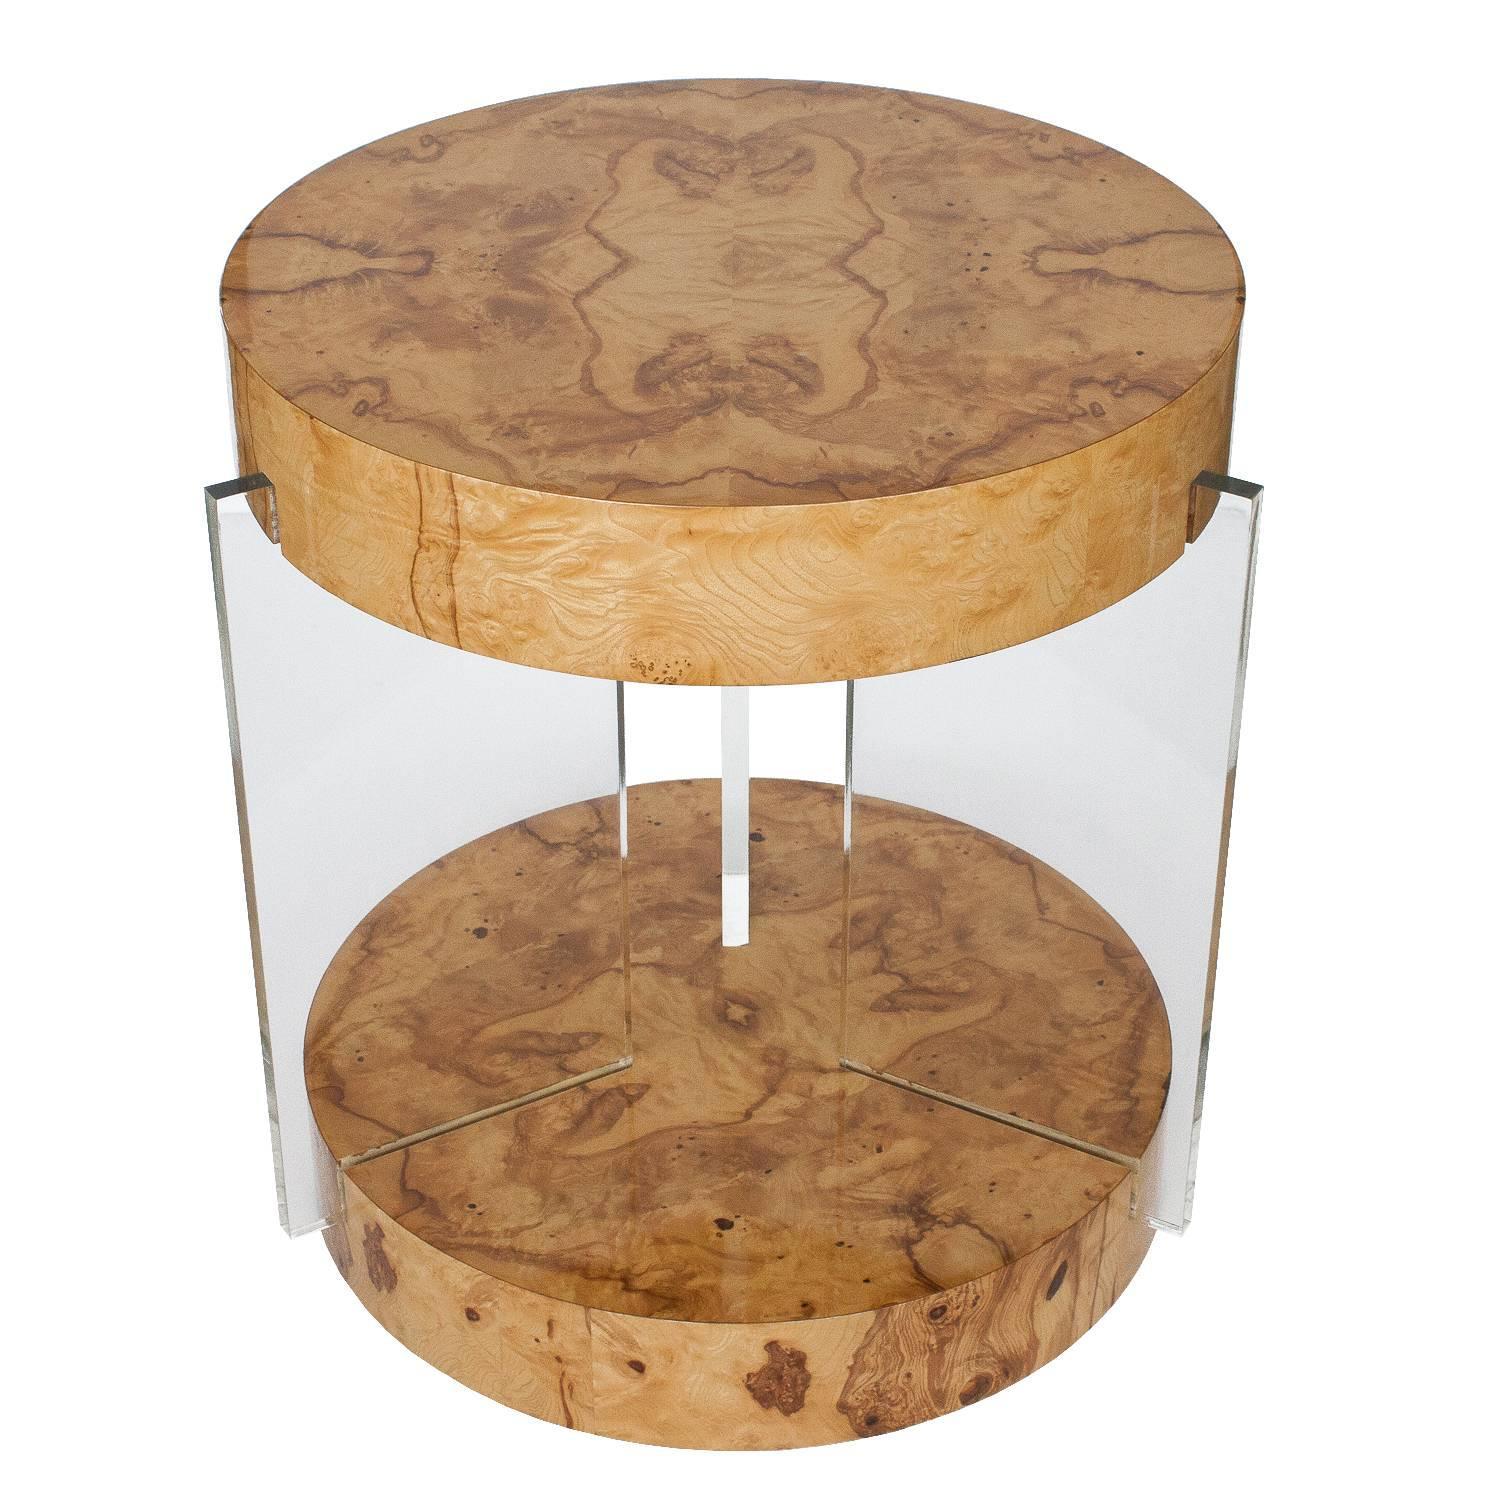 gaming table the perfect real burl wood end ideas rare lucite attributed vladimir kagan side half round bedside early american tables industrial dining set inch tablecloth slim